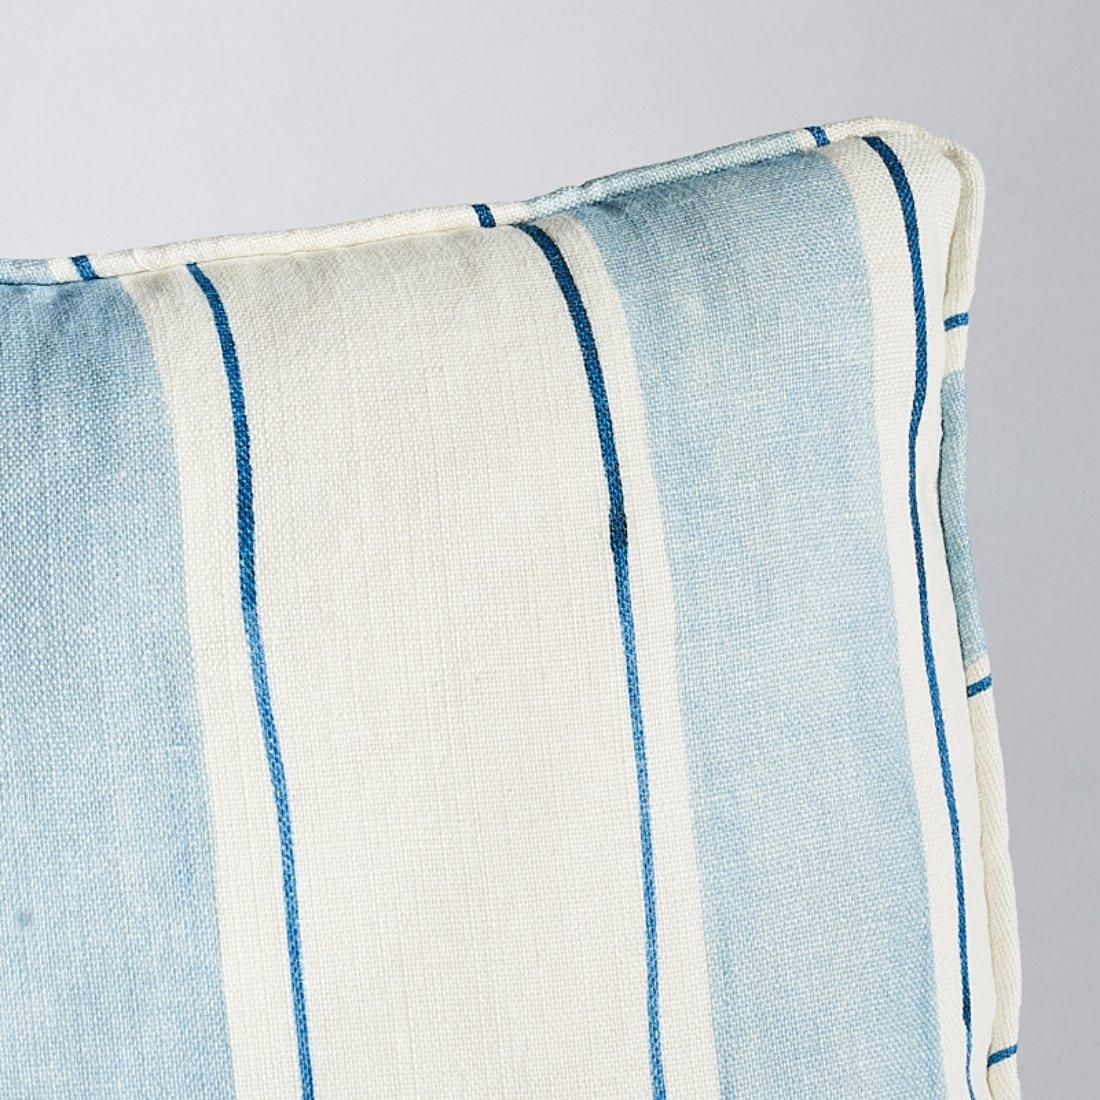 This pillow features Tracing Stripes by Porter Teleo for Schumacher with a Self Welt on a bias finish. Hand-done vertical stripes make a bold and graphic statement that’s softened just enough by the echo of delicate tracing. Pillow includes a